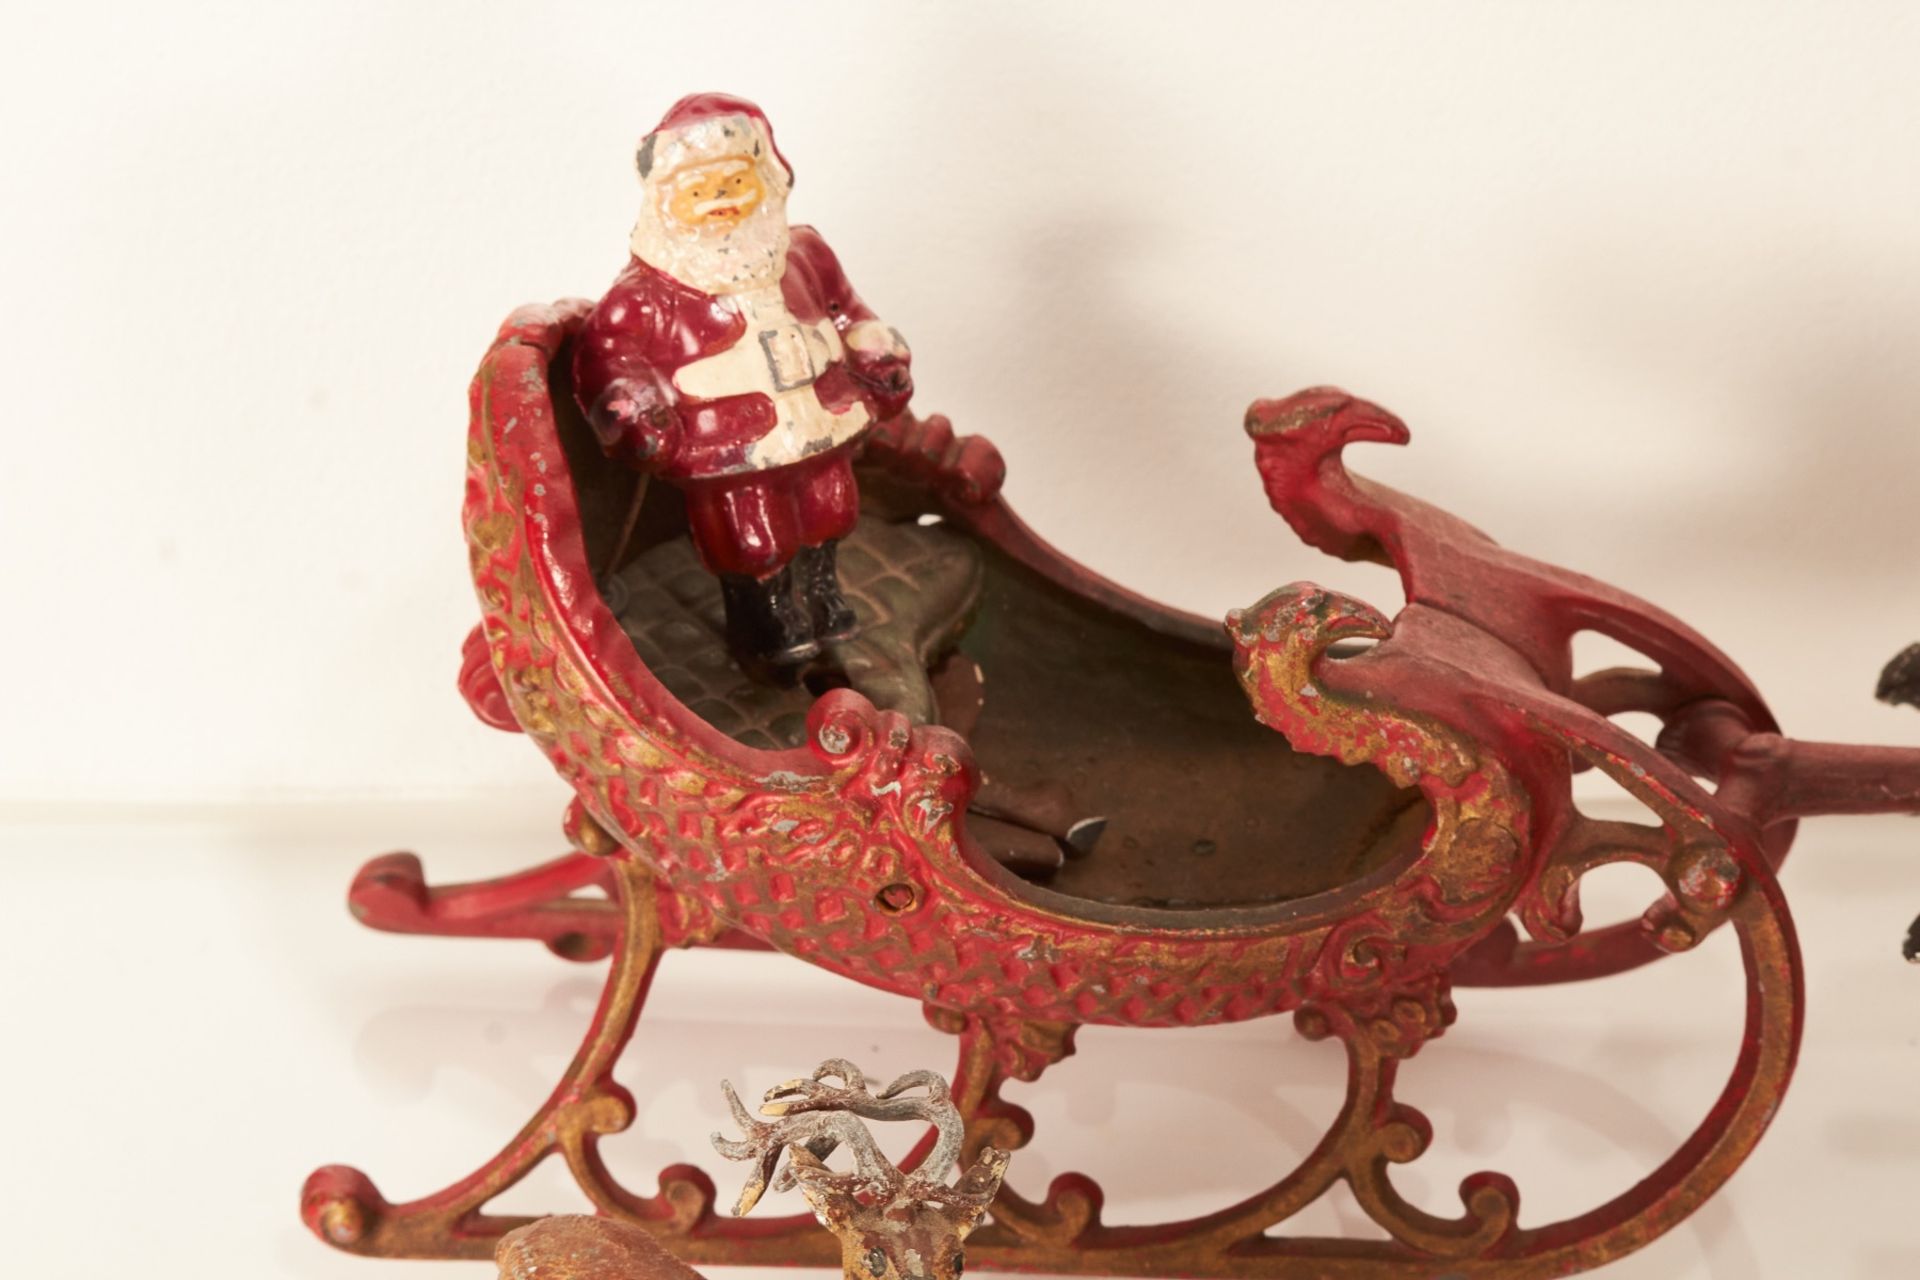 A mid-20th century die-cast model of Santa’s sleigh and two reindeer - Image 2 of 2